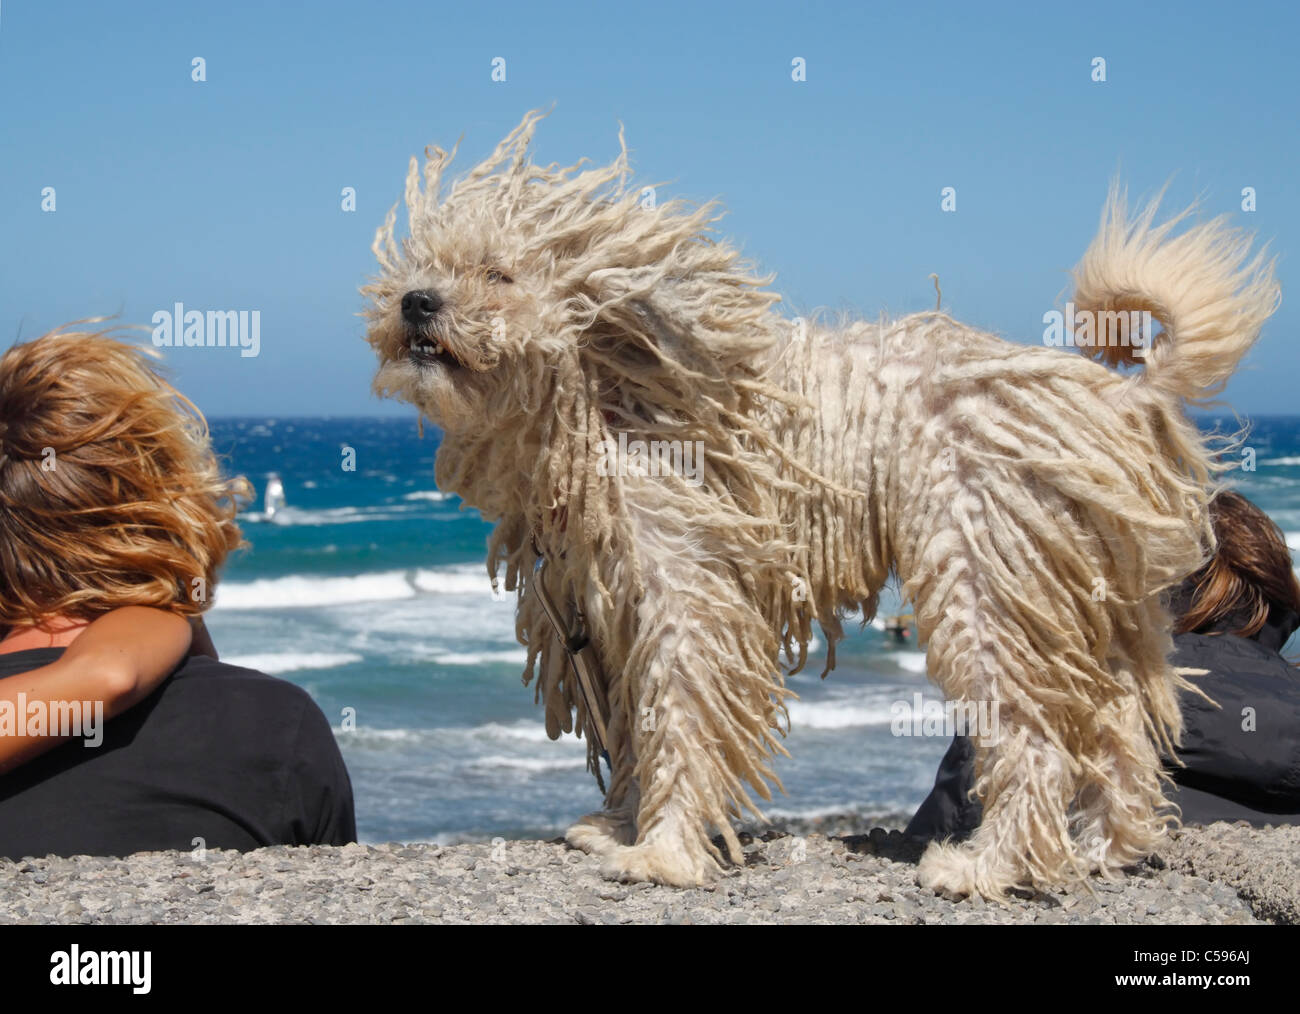 Puli breed of dog - also known as Hungarian Water dog - with it's unique Dreadlock-lile corded coat on windy day at the coast Stock Photo